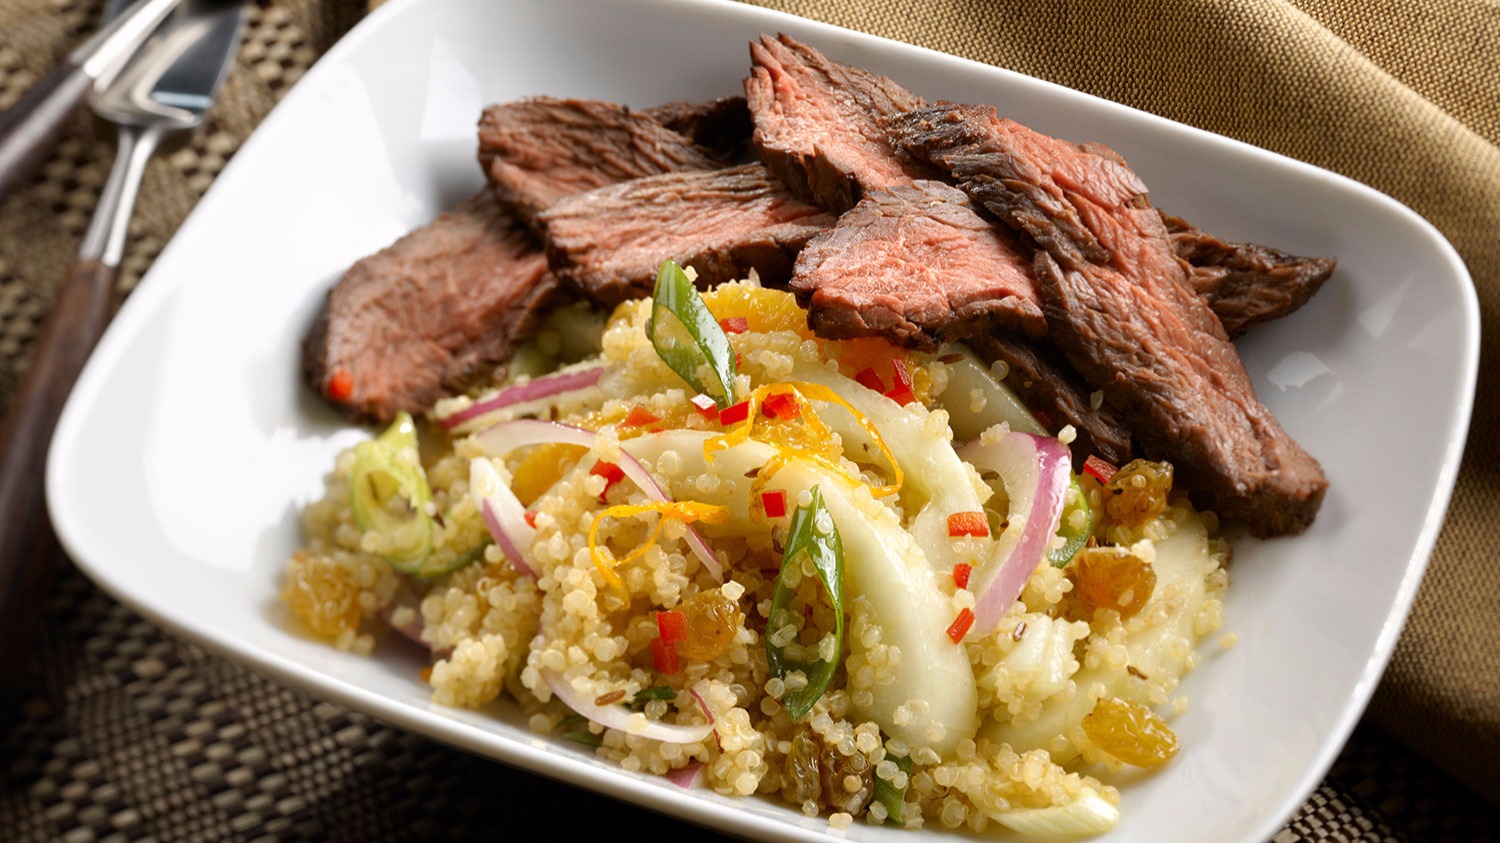 Beef and quinoa using whole grains for batch cooking meals